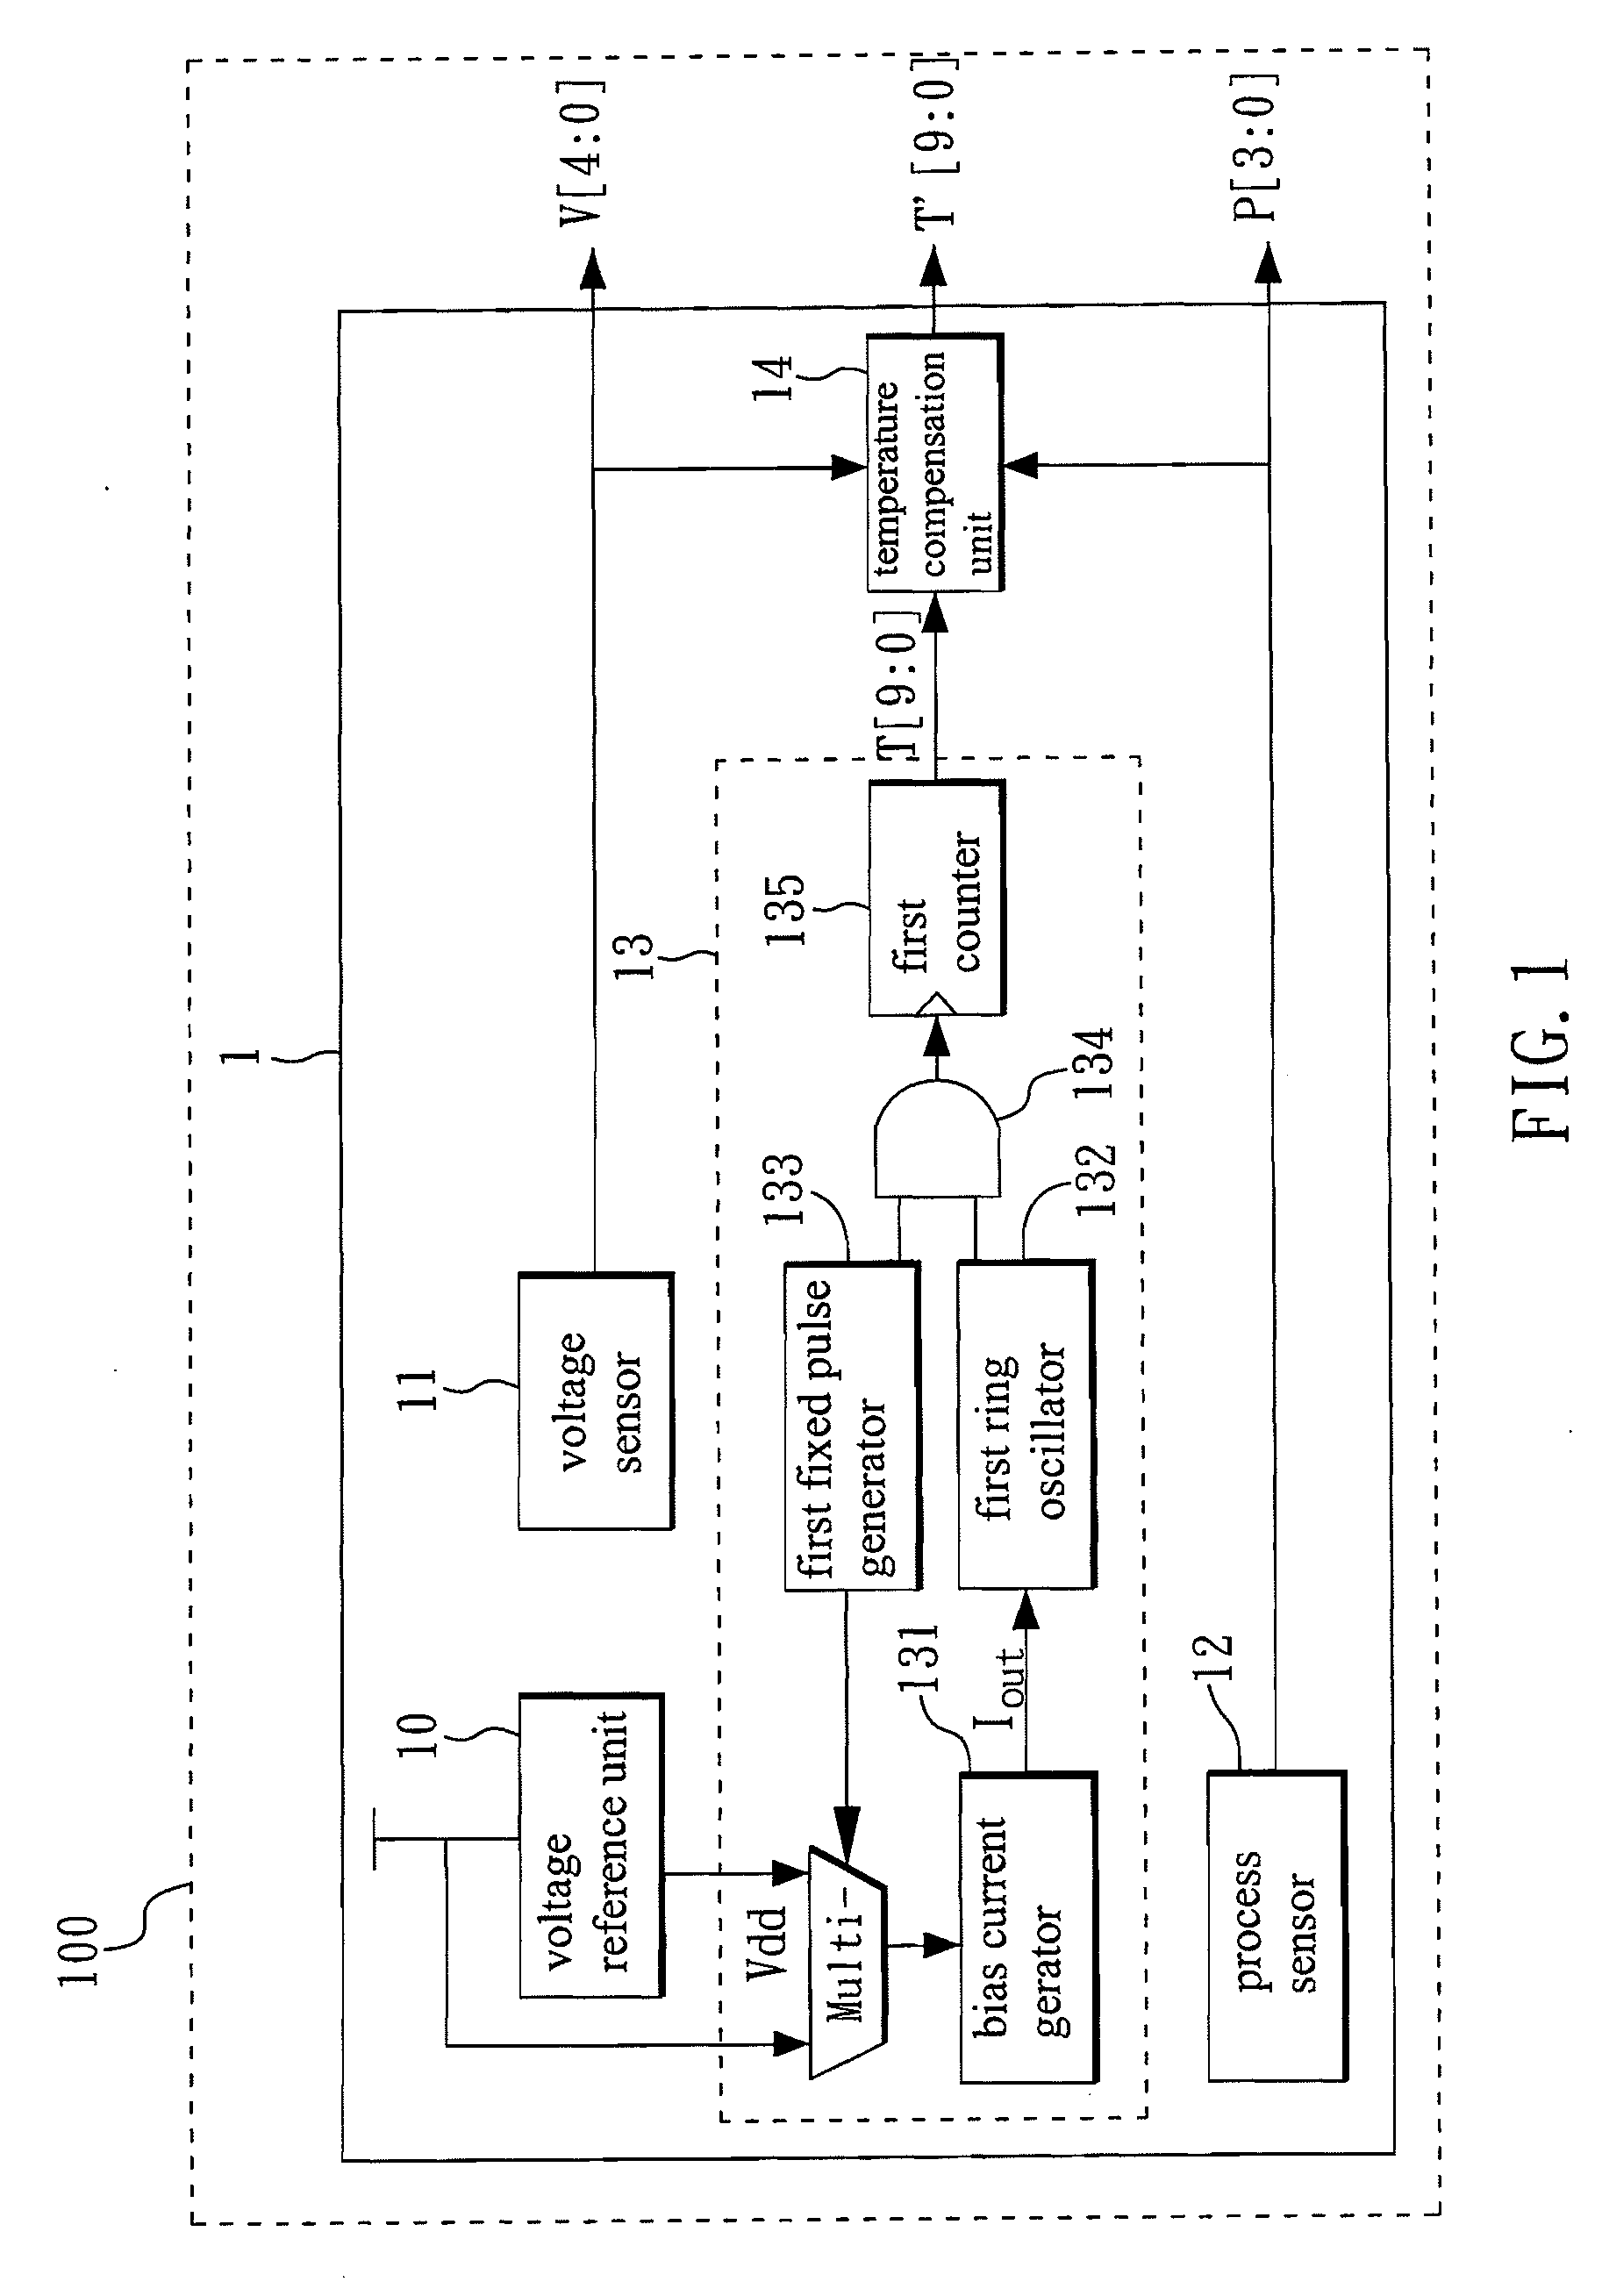 Fully-on-chip temperature, process, and voltage sensor system